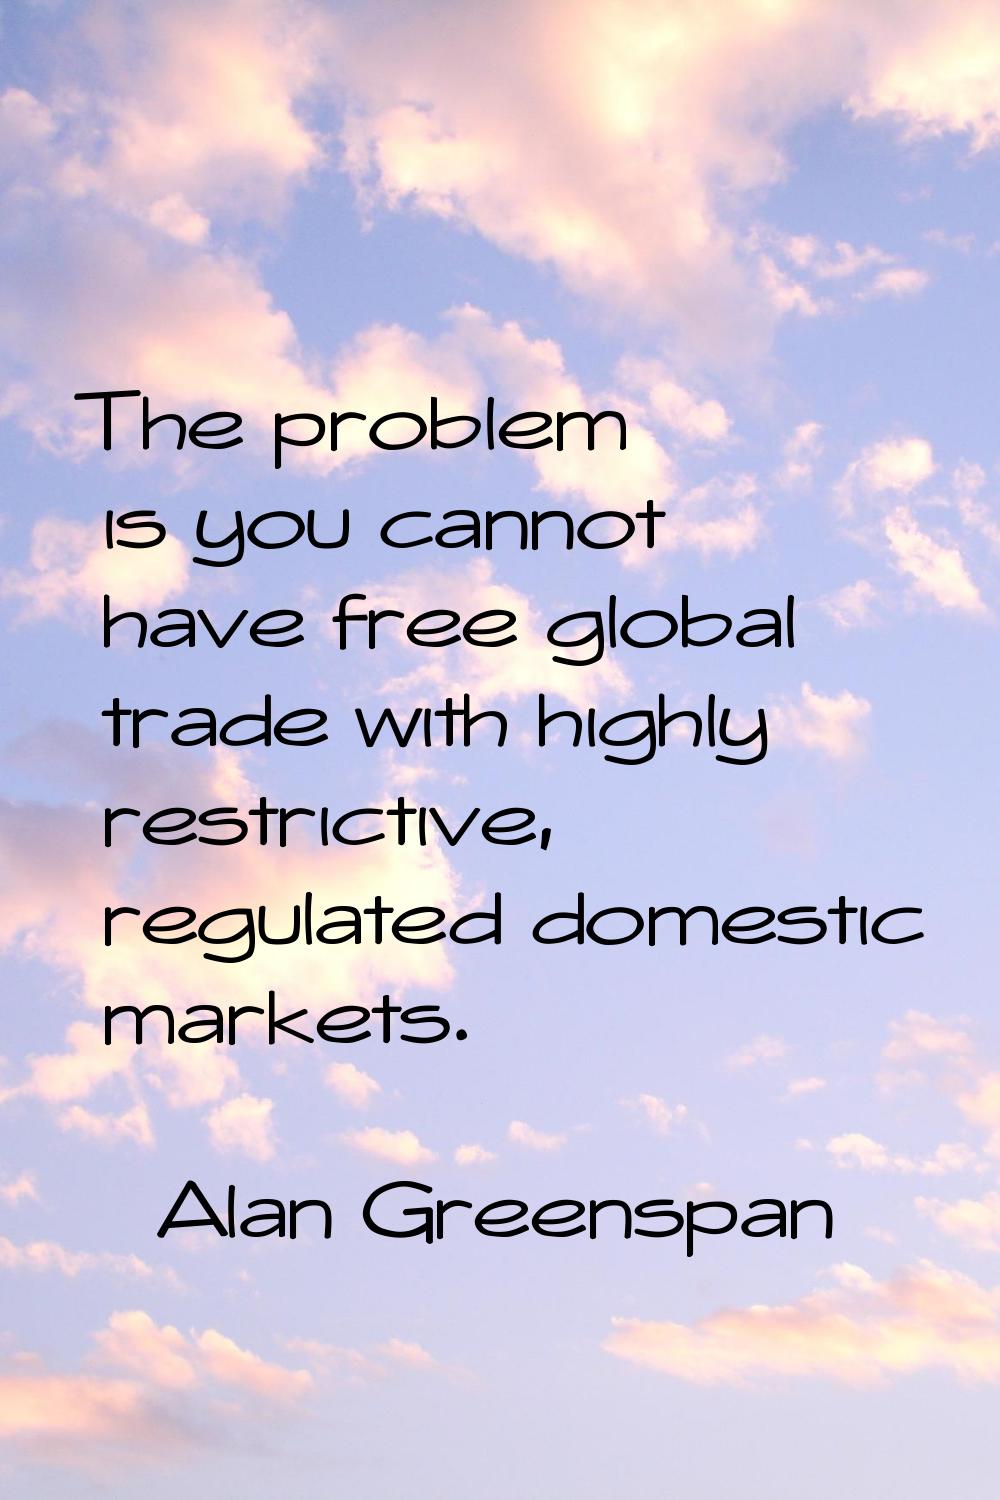 The problem is you cannot have free global trade with highly restrictive, regulated domestic market